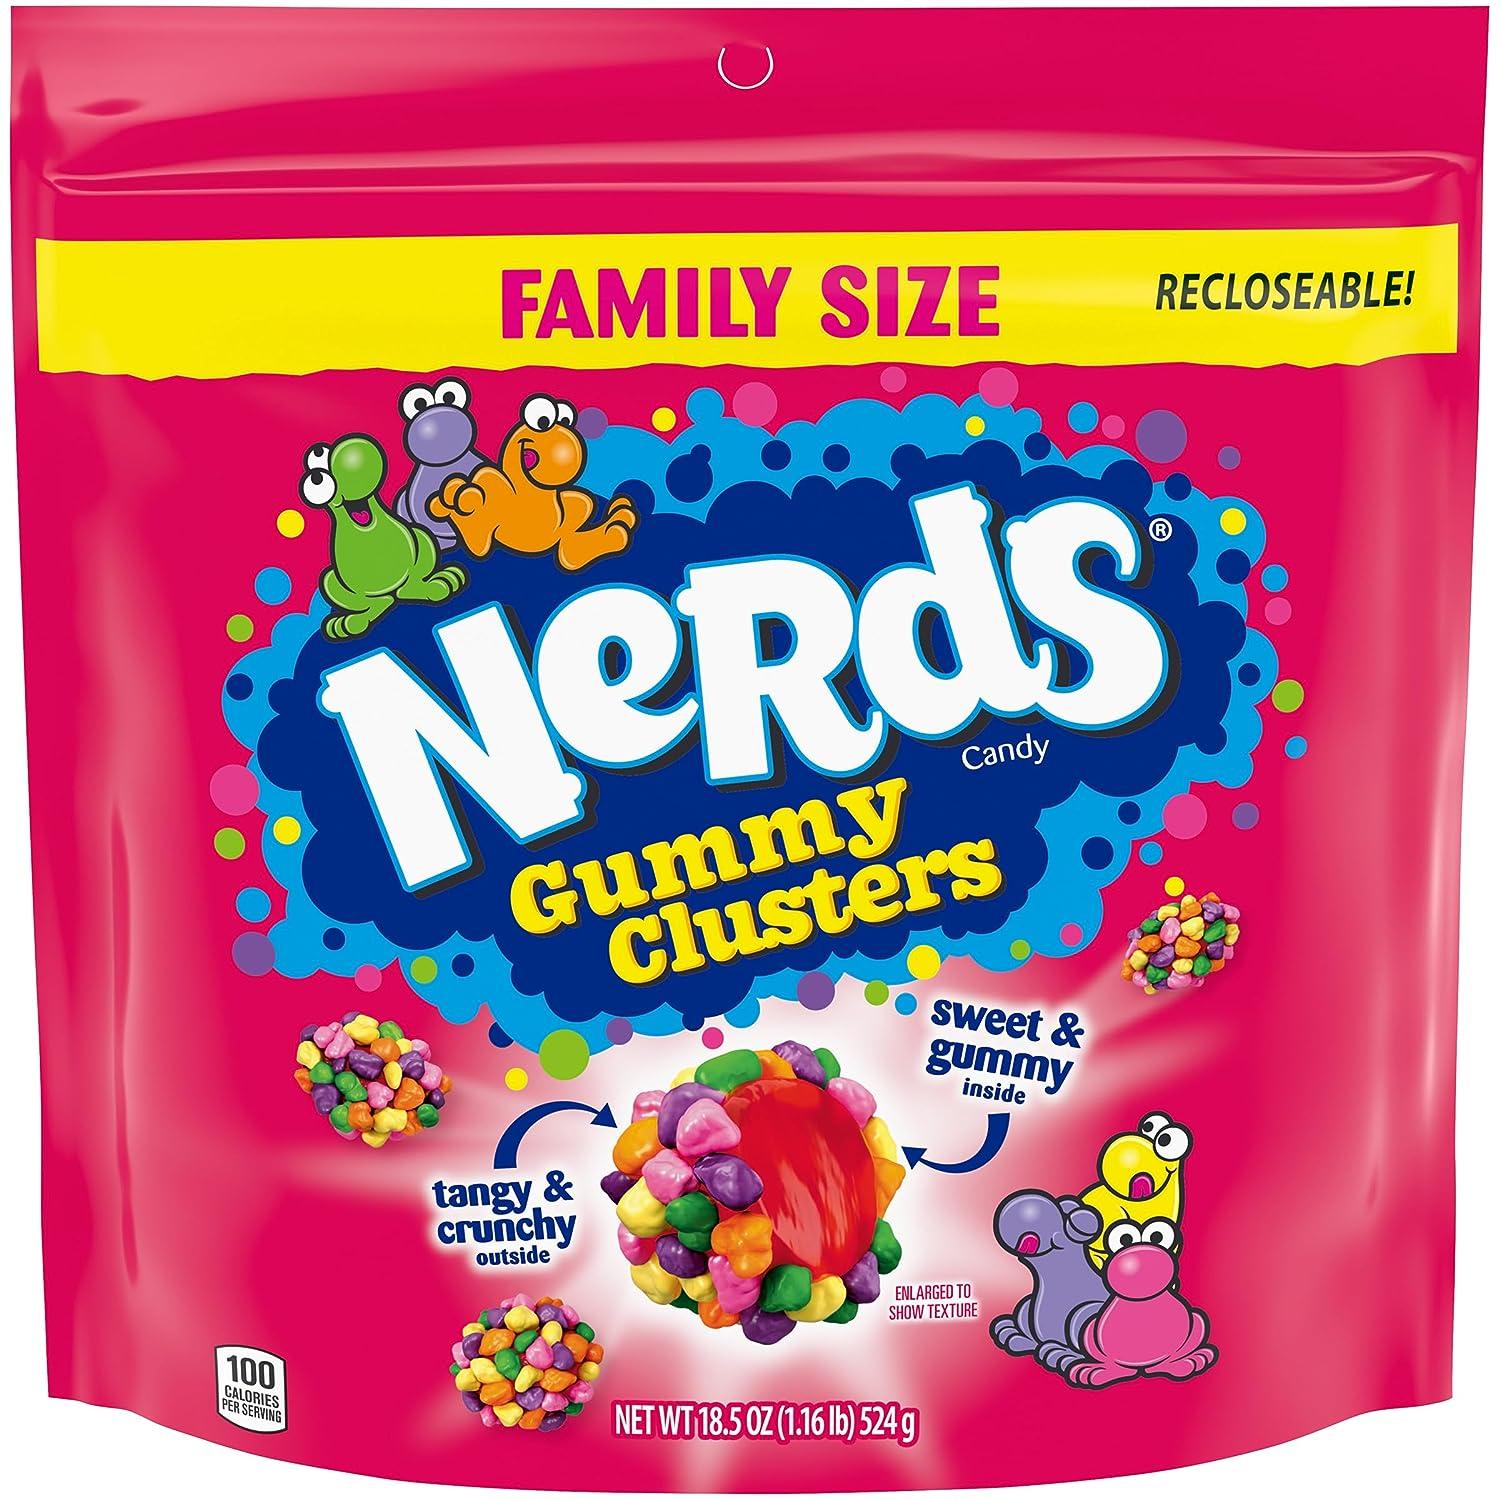 Nerds Gummy Clusters Candy Family Size Bag for $4.89